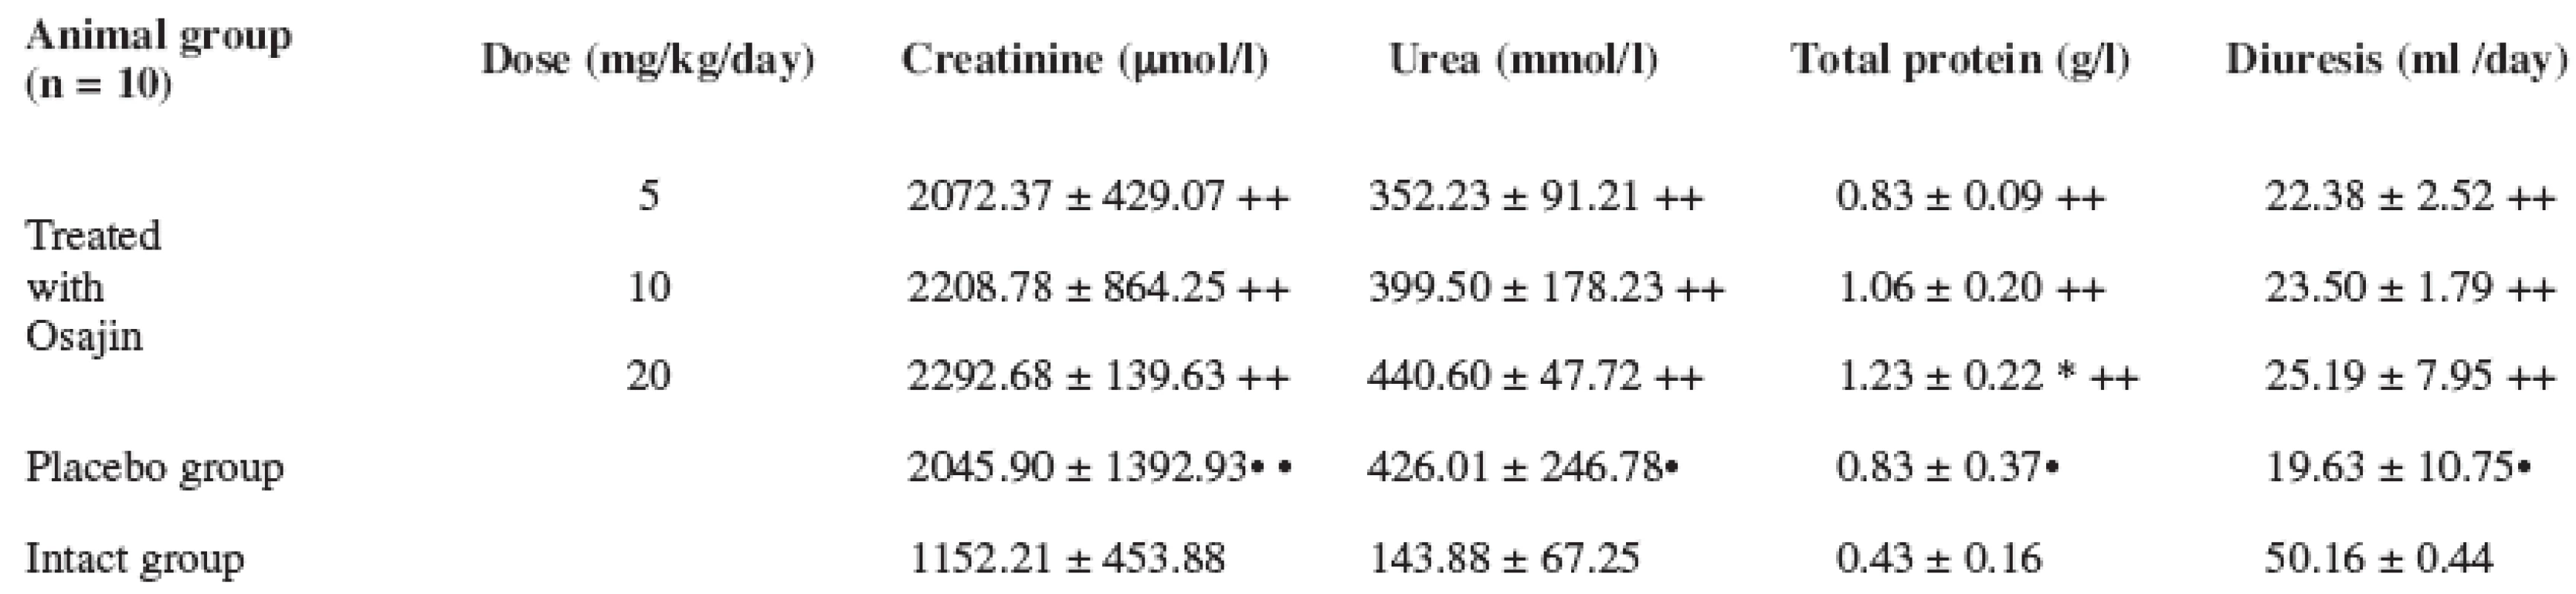 Effect of osajin administration on urine values of creatinine, urea, total protein and diuresis